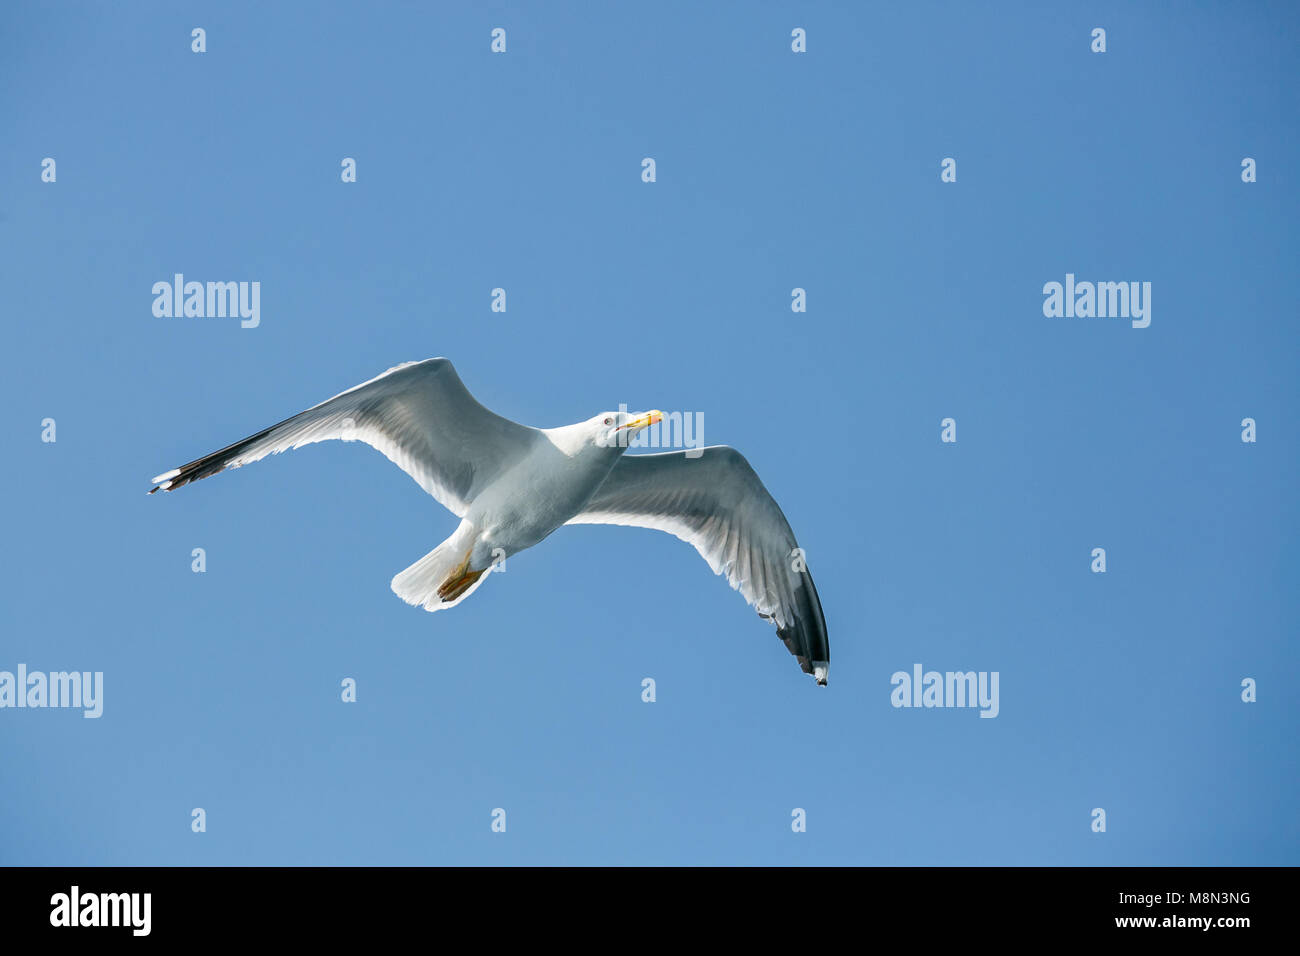 Seagull flying in the blue sky Stock Photo